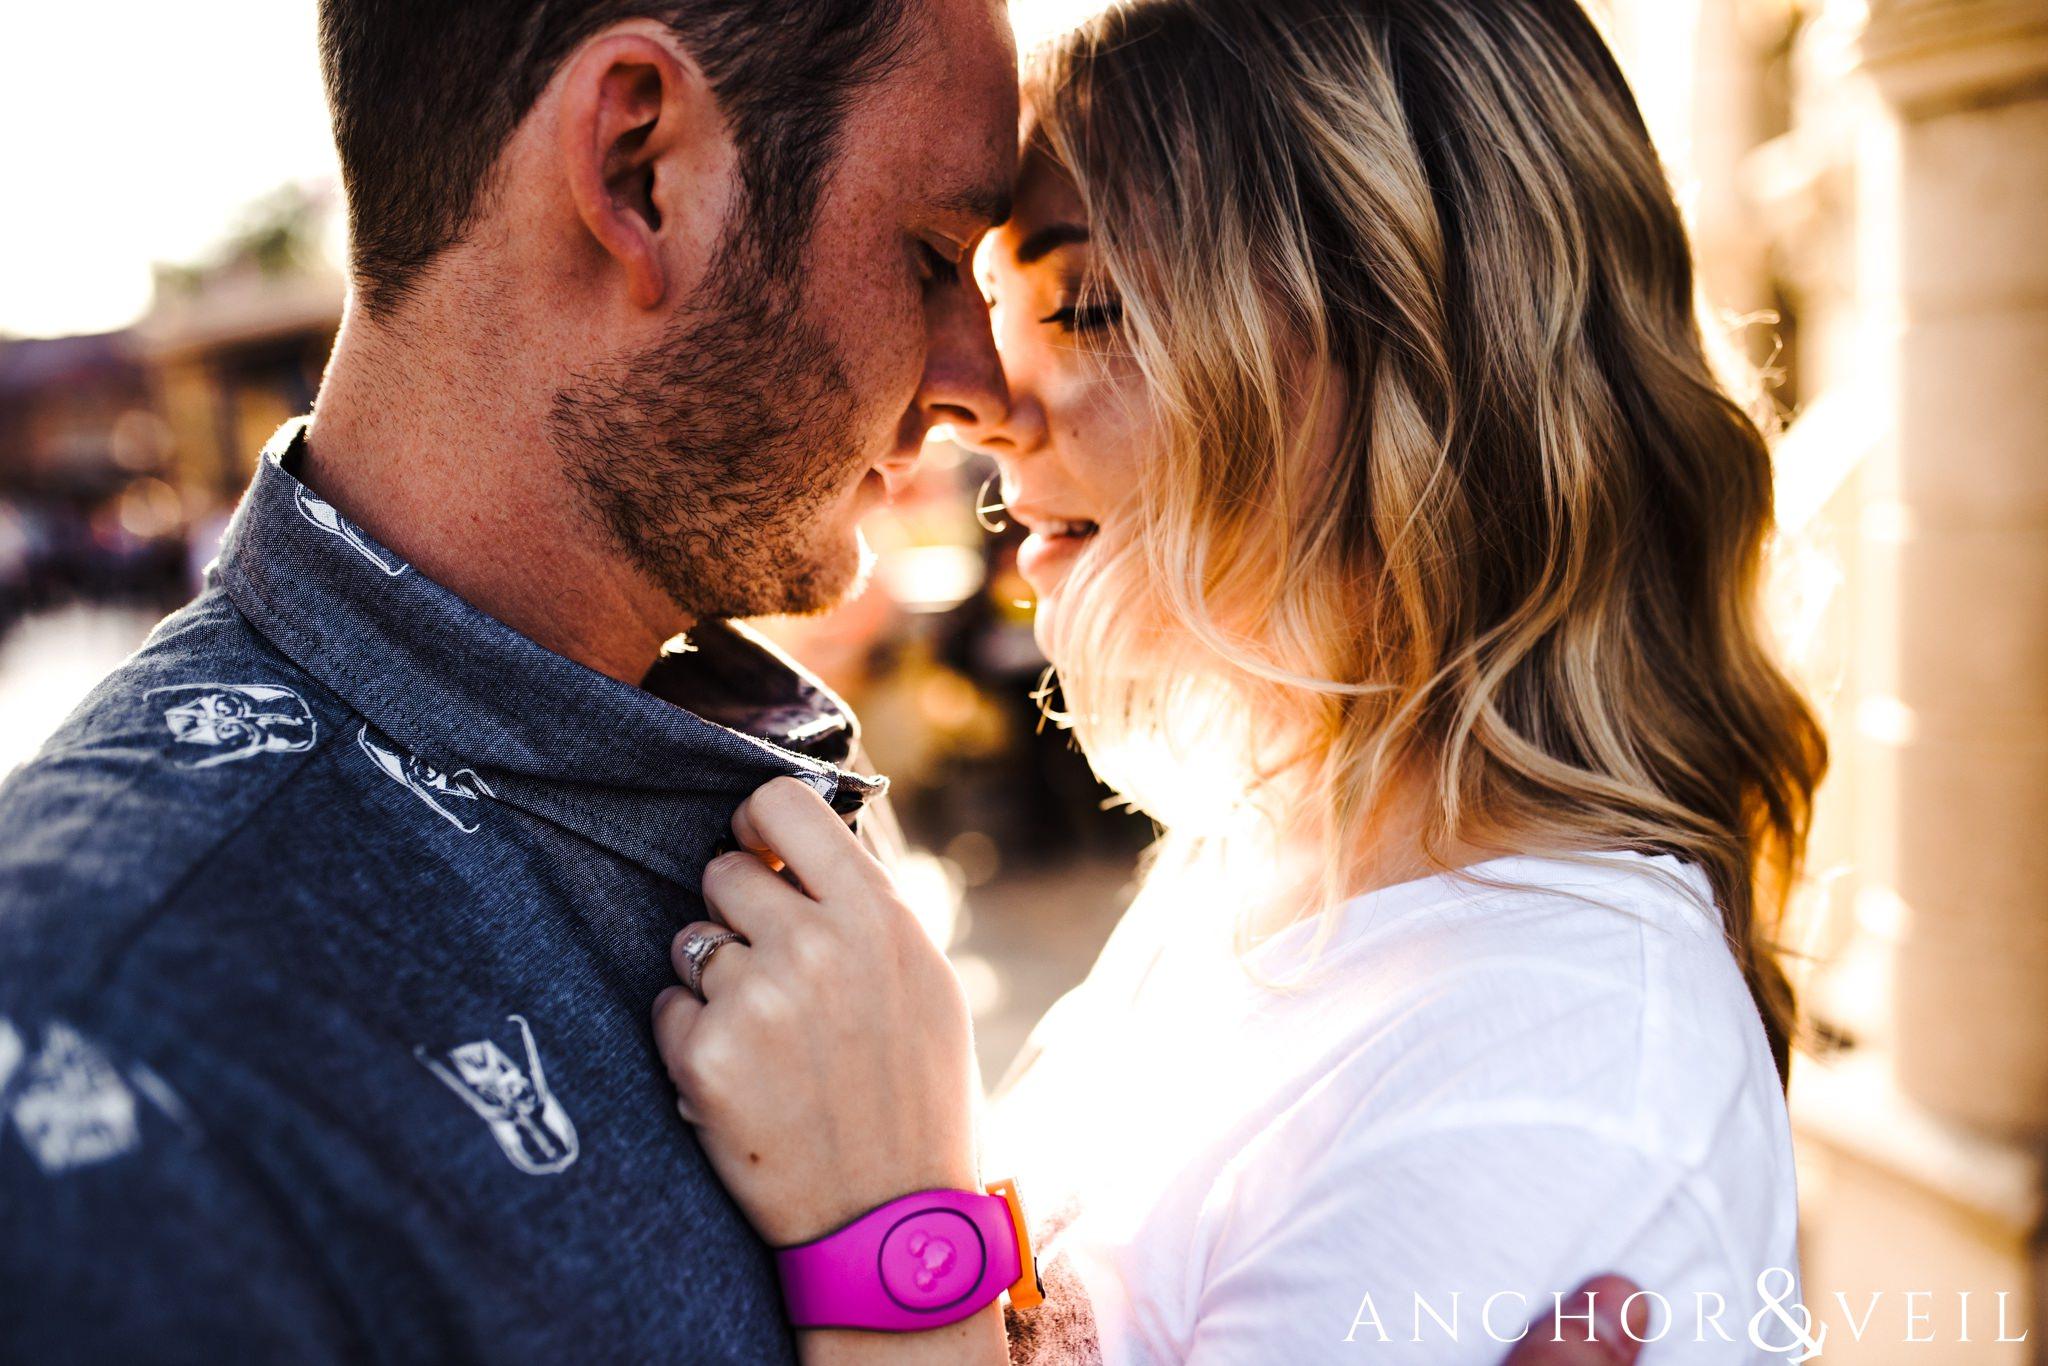 getting really close in love during their Disney world engagement session at Disney's Magic Kingdom